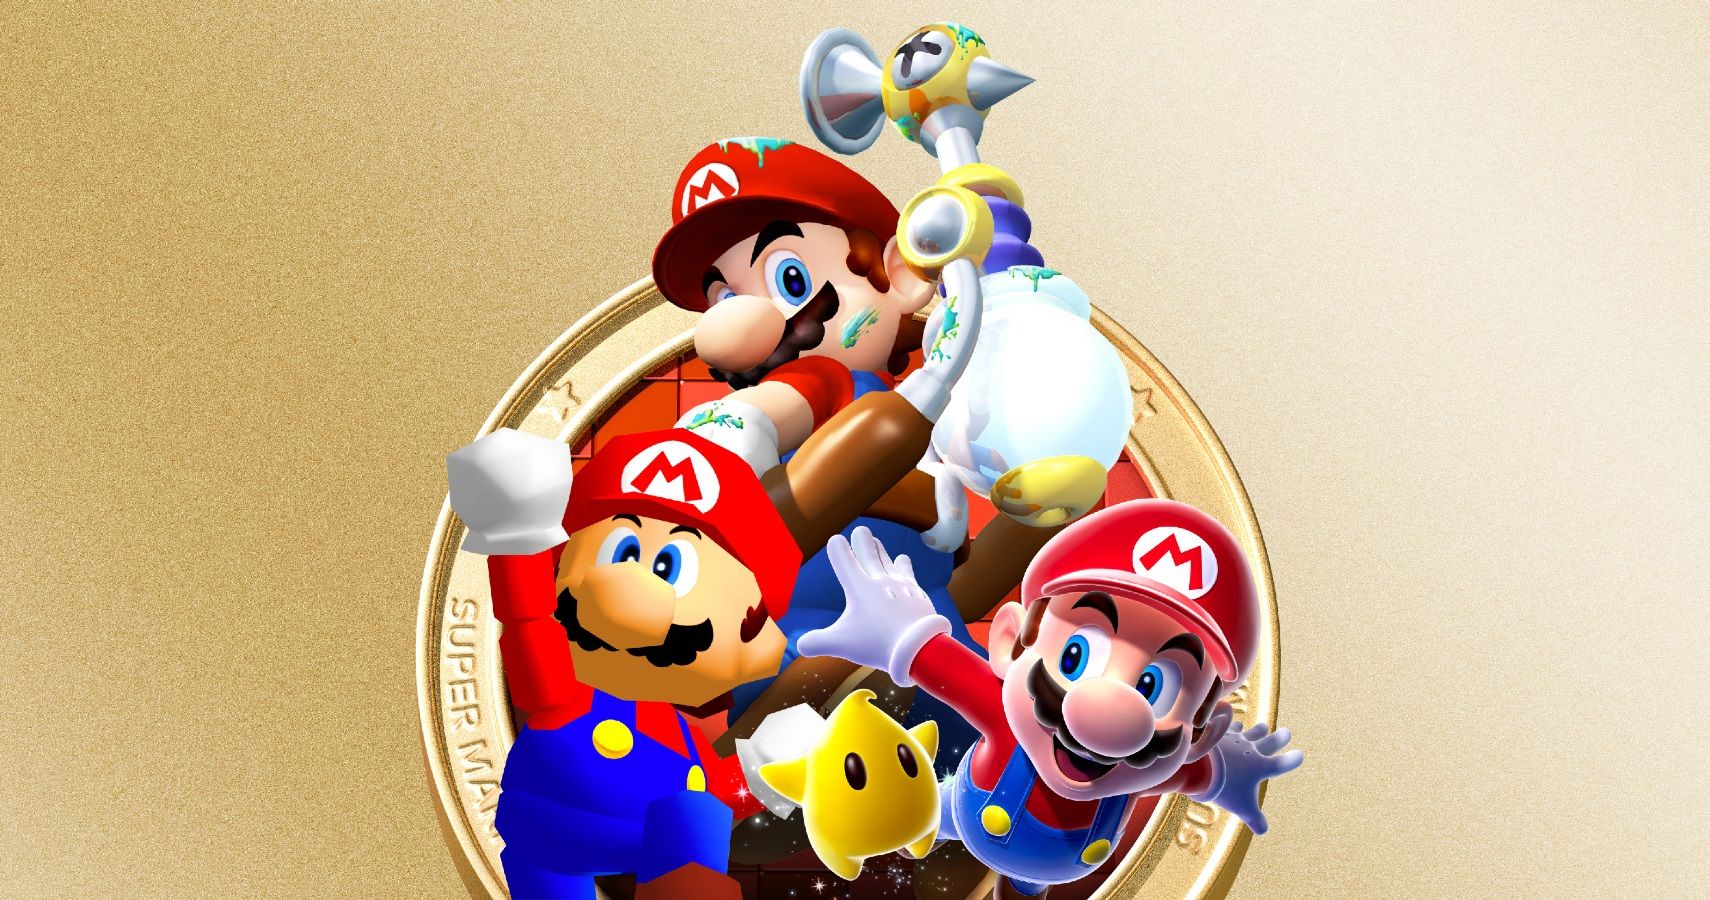 There's Only Two Weeks Left To Buy Super Mario 3D All-Stars